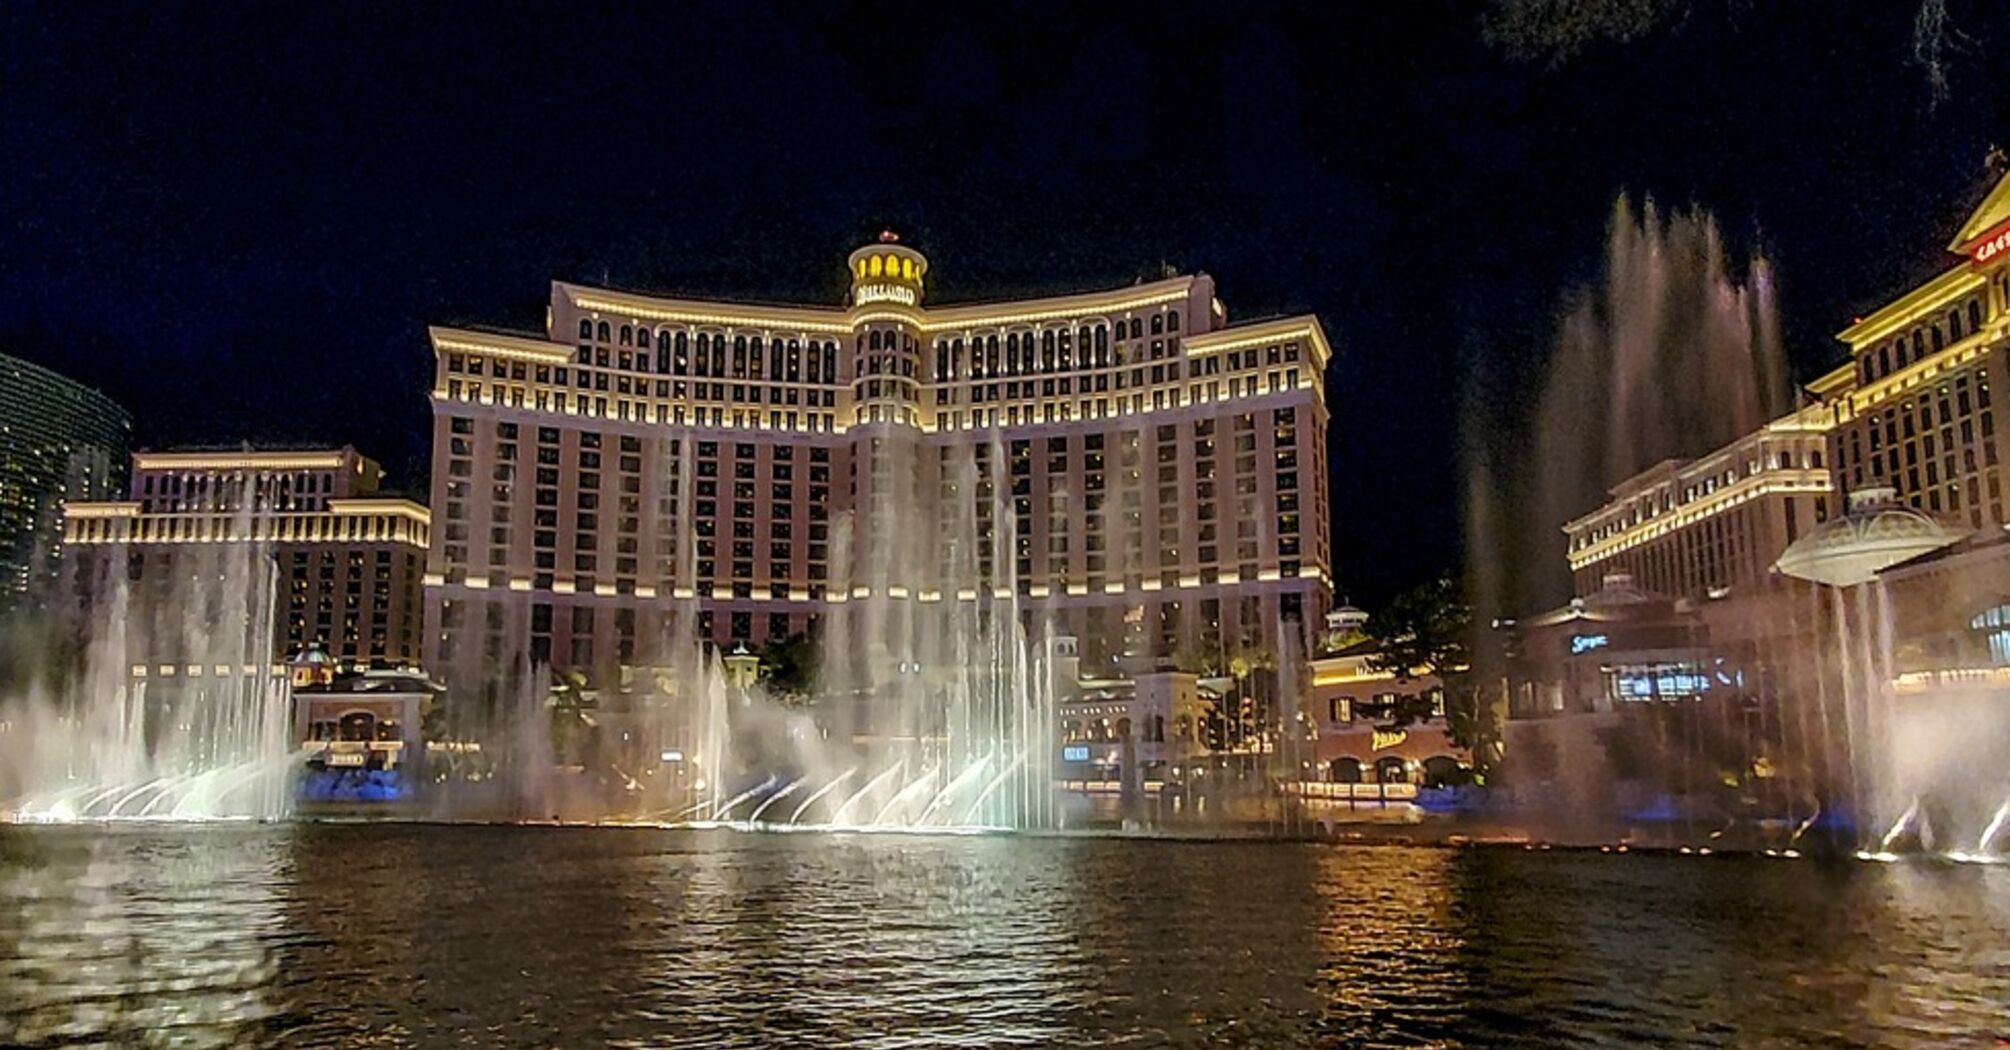 A rare bird stopped the operation of the Bellagio fountains in Las Vegas